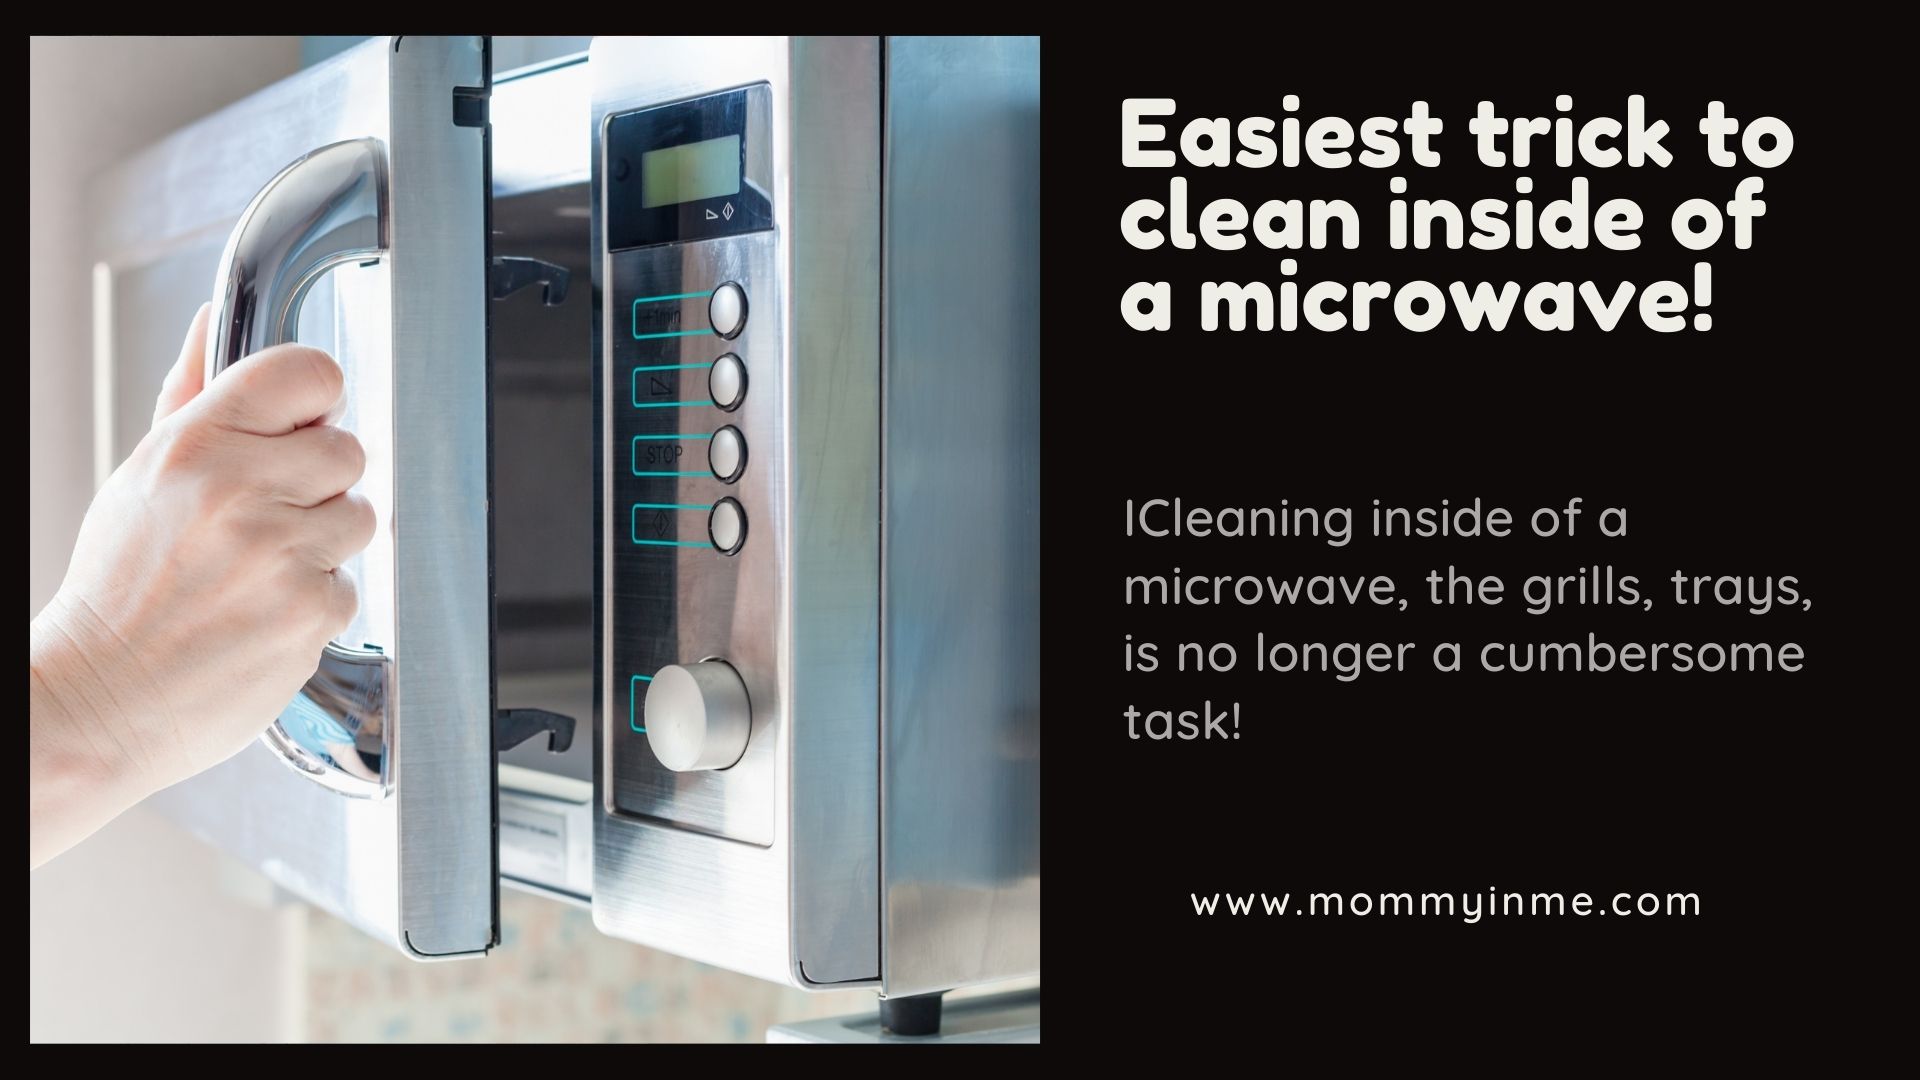 What’s the easiest trick to clean inside of a microwave?